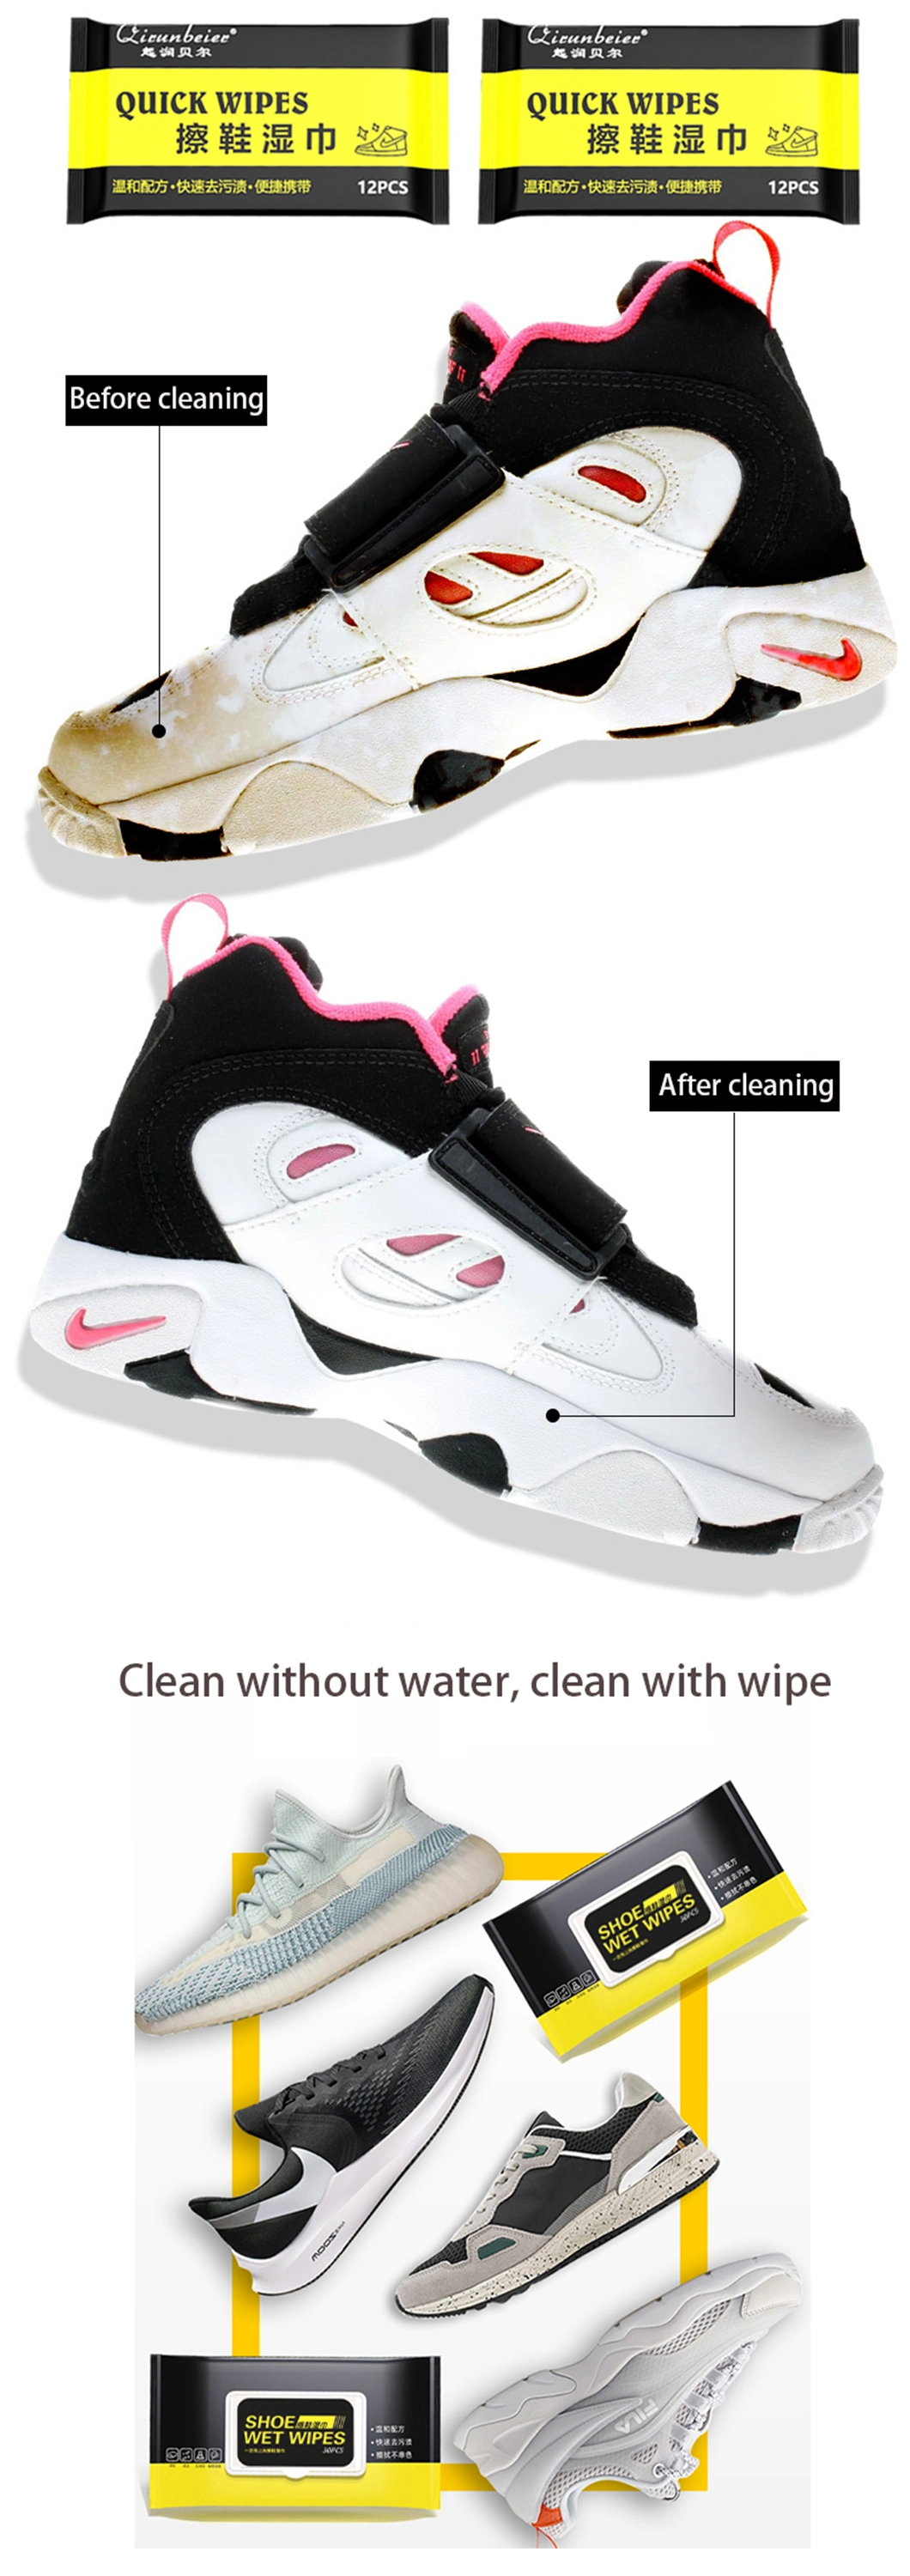 High Quality Shoe Cleaning Disinfecting Wash Free Wipes